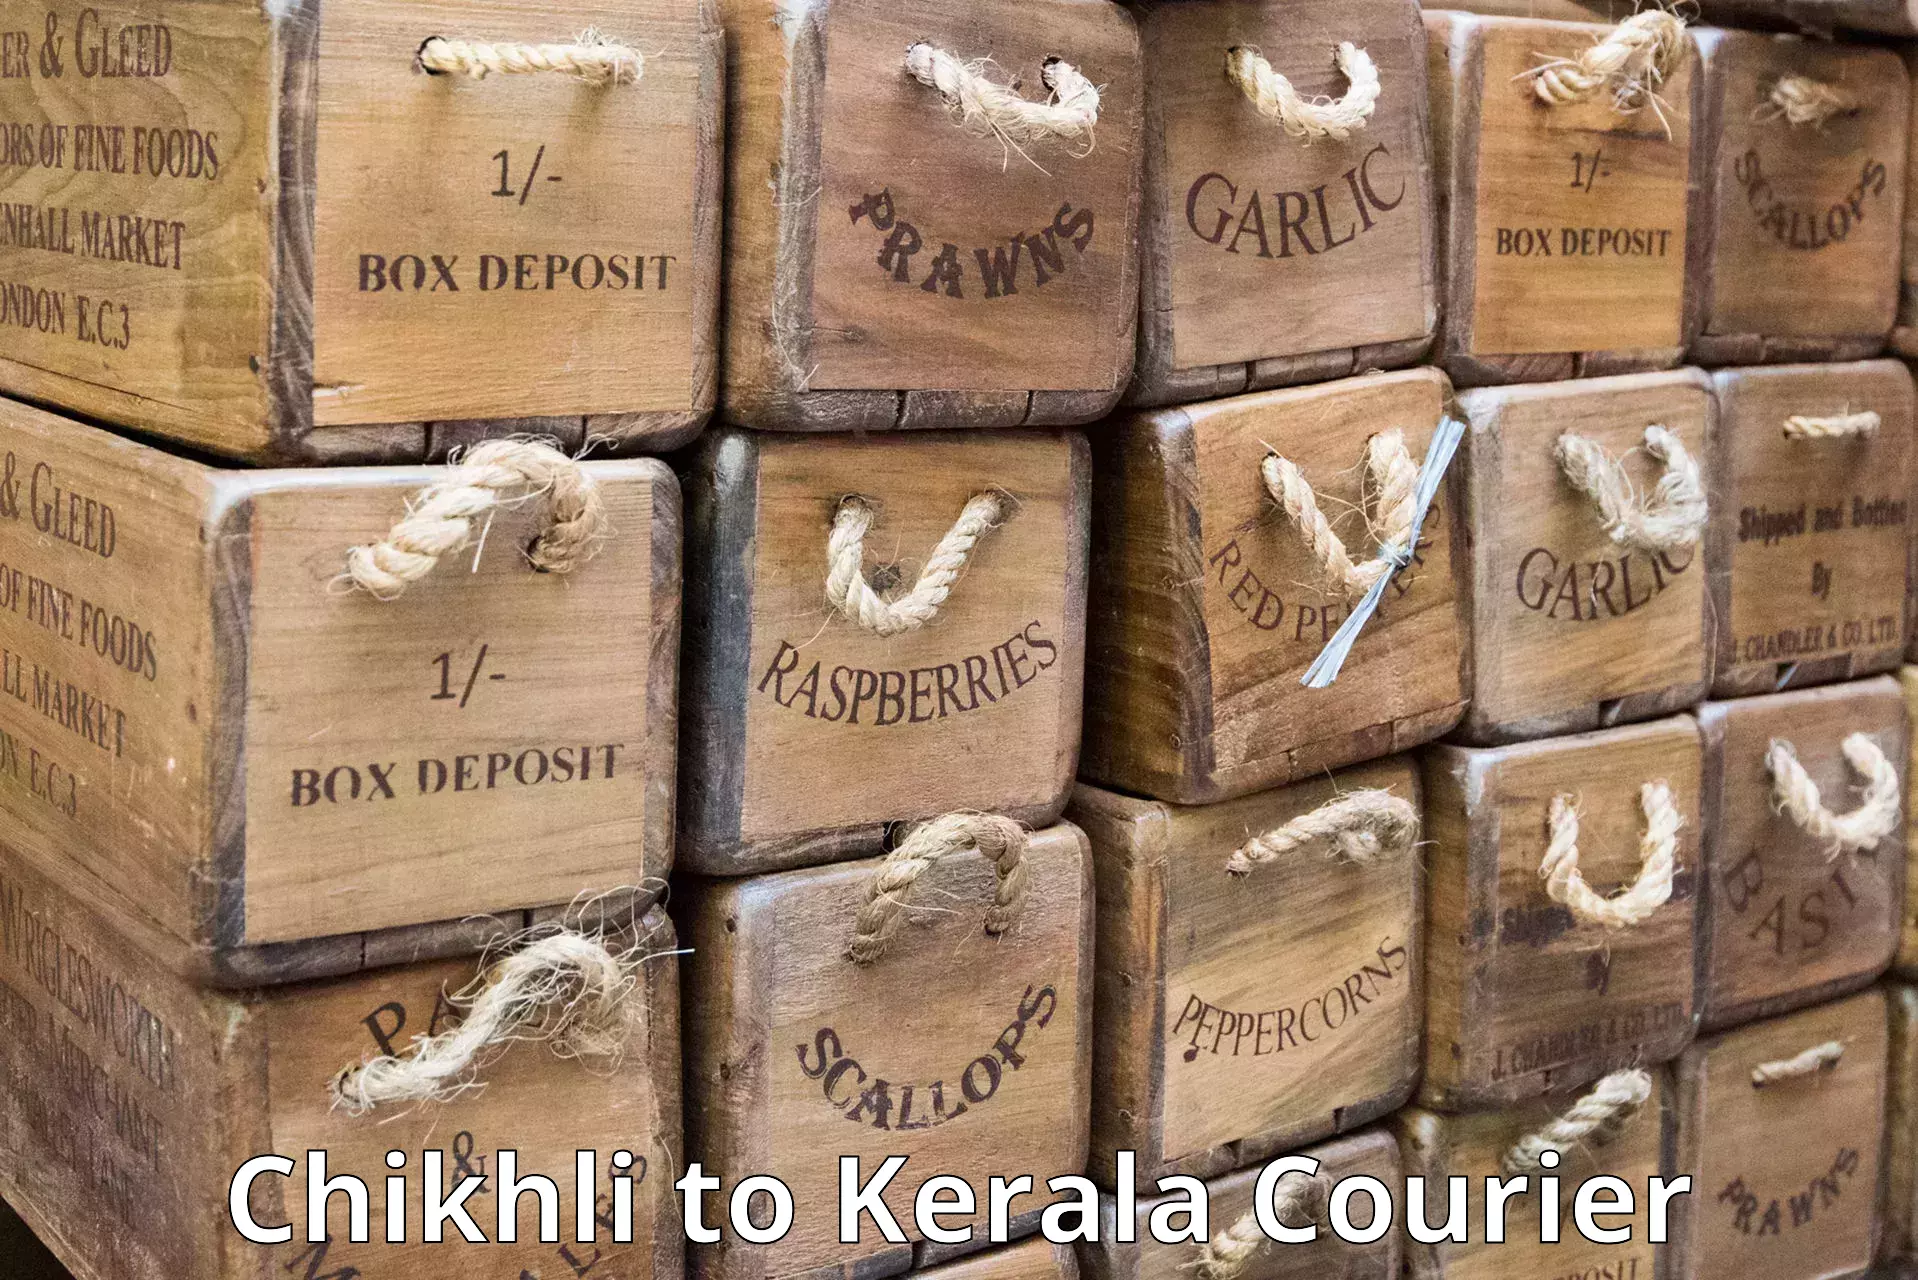 24/7 courier service Chikhli to Pala